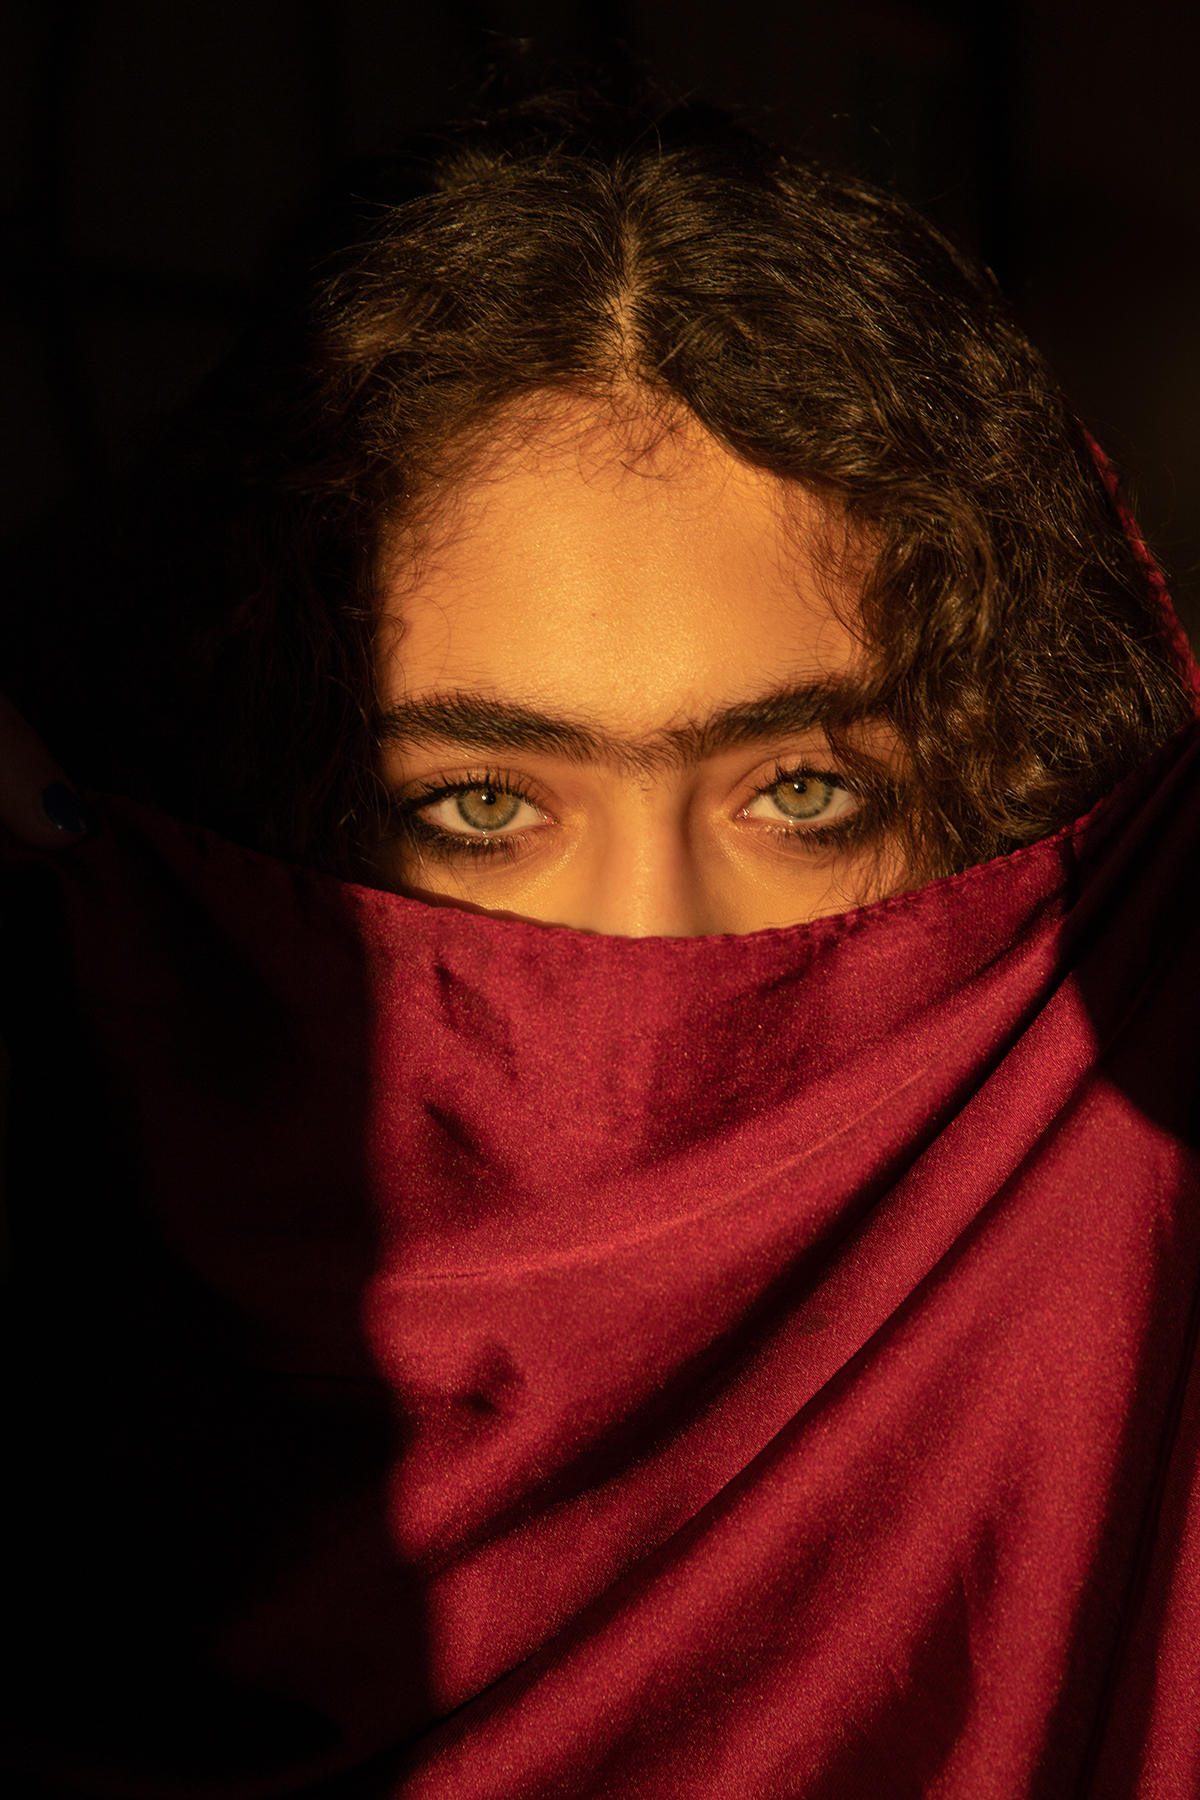 Radical Beauty - Middle Eastern beauty with Deba, Arwa, and Sally